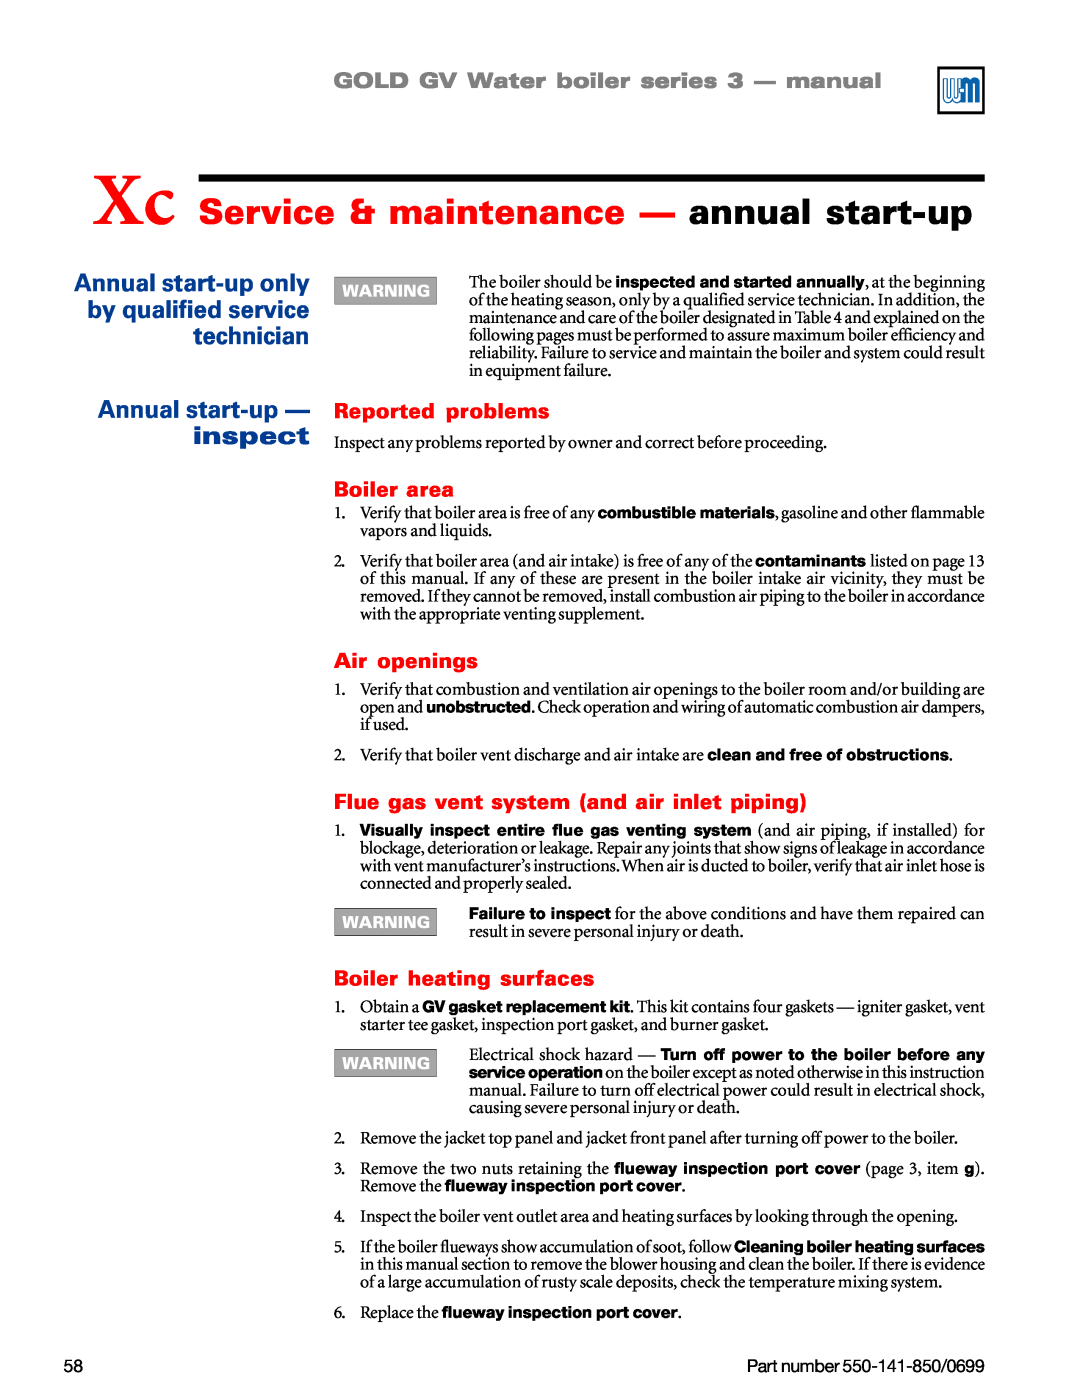 Weil-McLain GOLD DV WATER BOILER Xc Service & maintenance — annual start-up, Annual start-up— inspect, Reported problems 